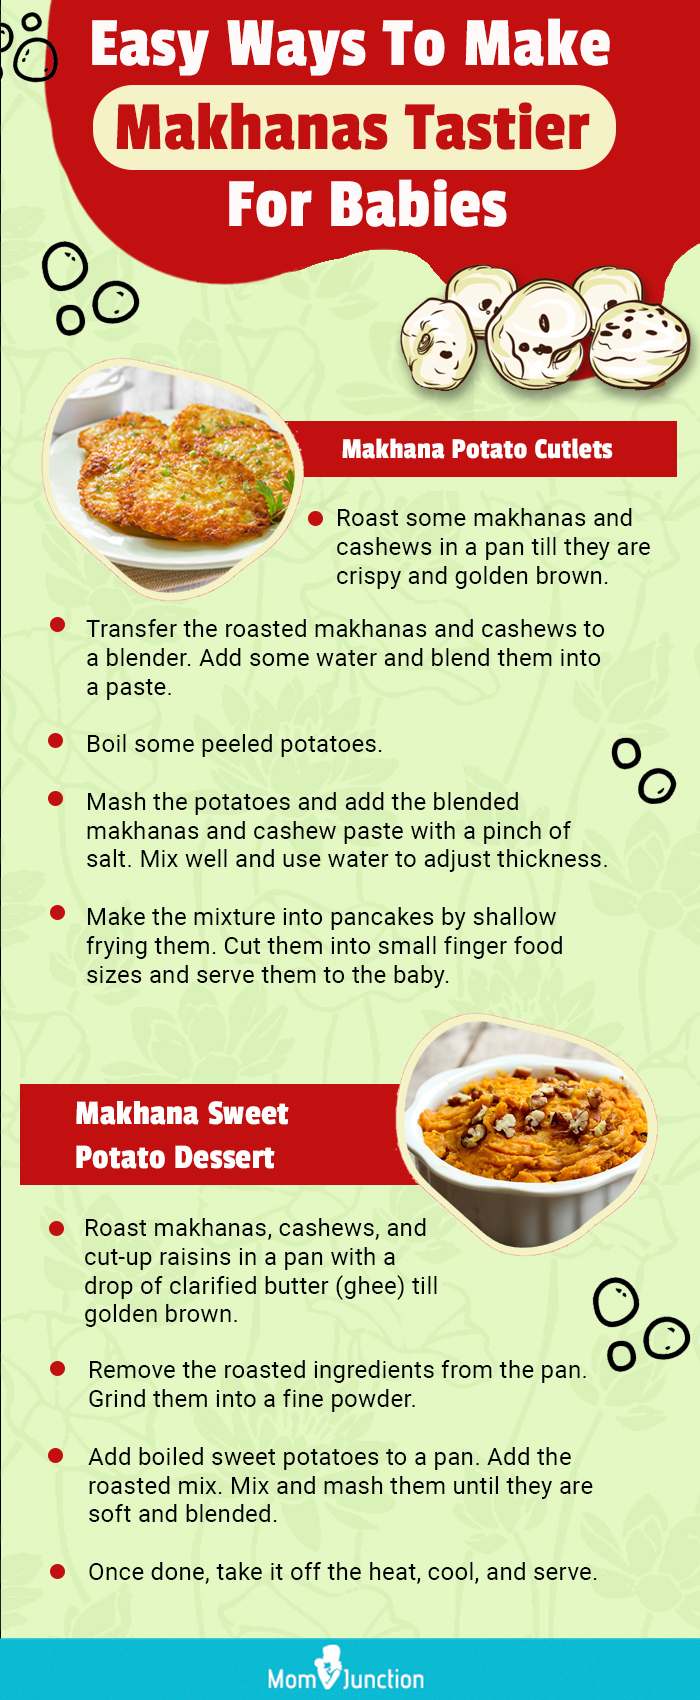 easy ways to make makhanas tastier for babies (infographic)